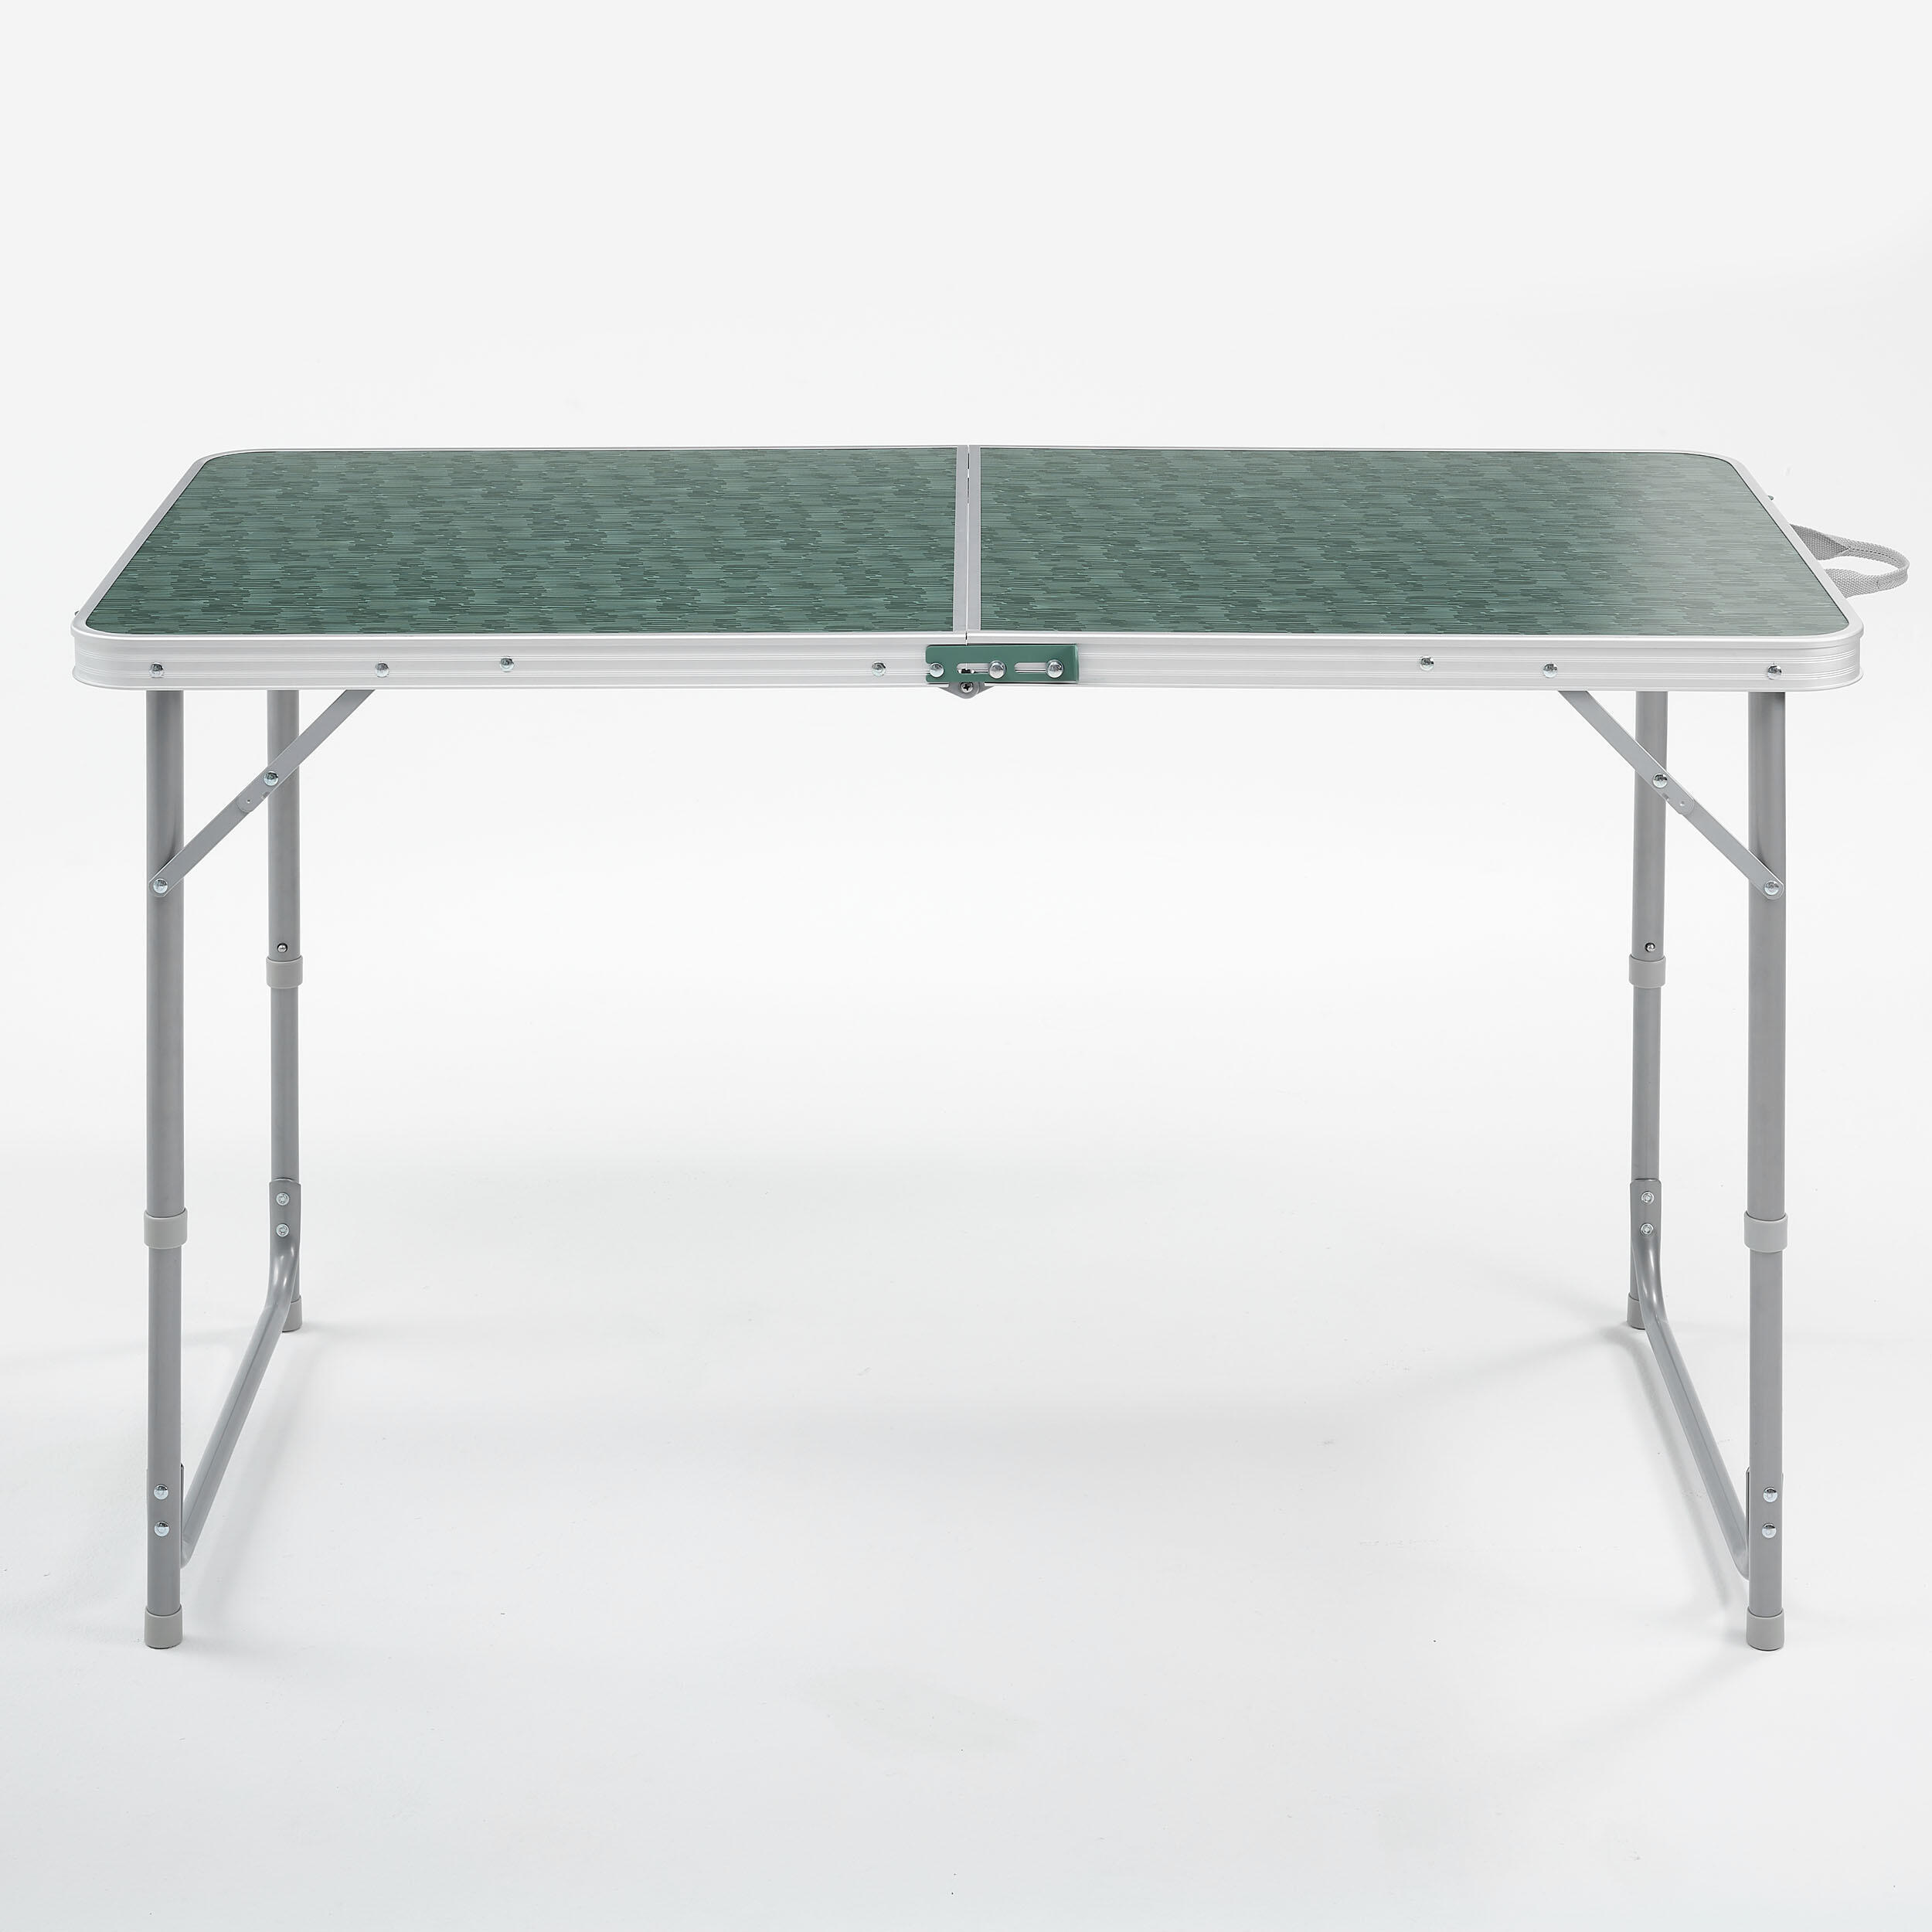 FOLDING CAMPING TABLE - 4 TO 6 PEOPLE 6/12